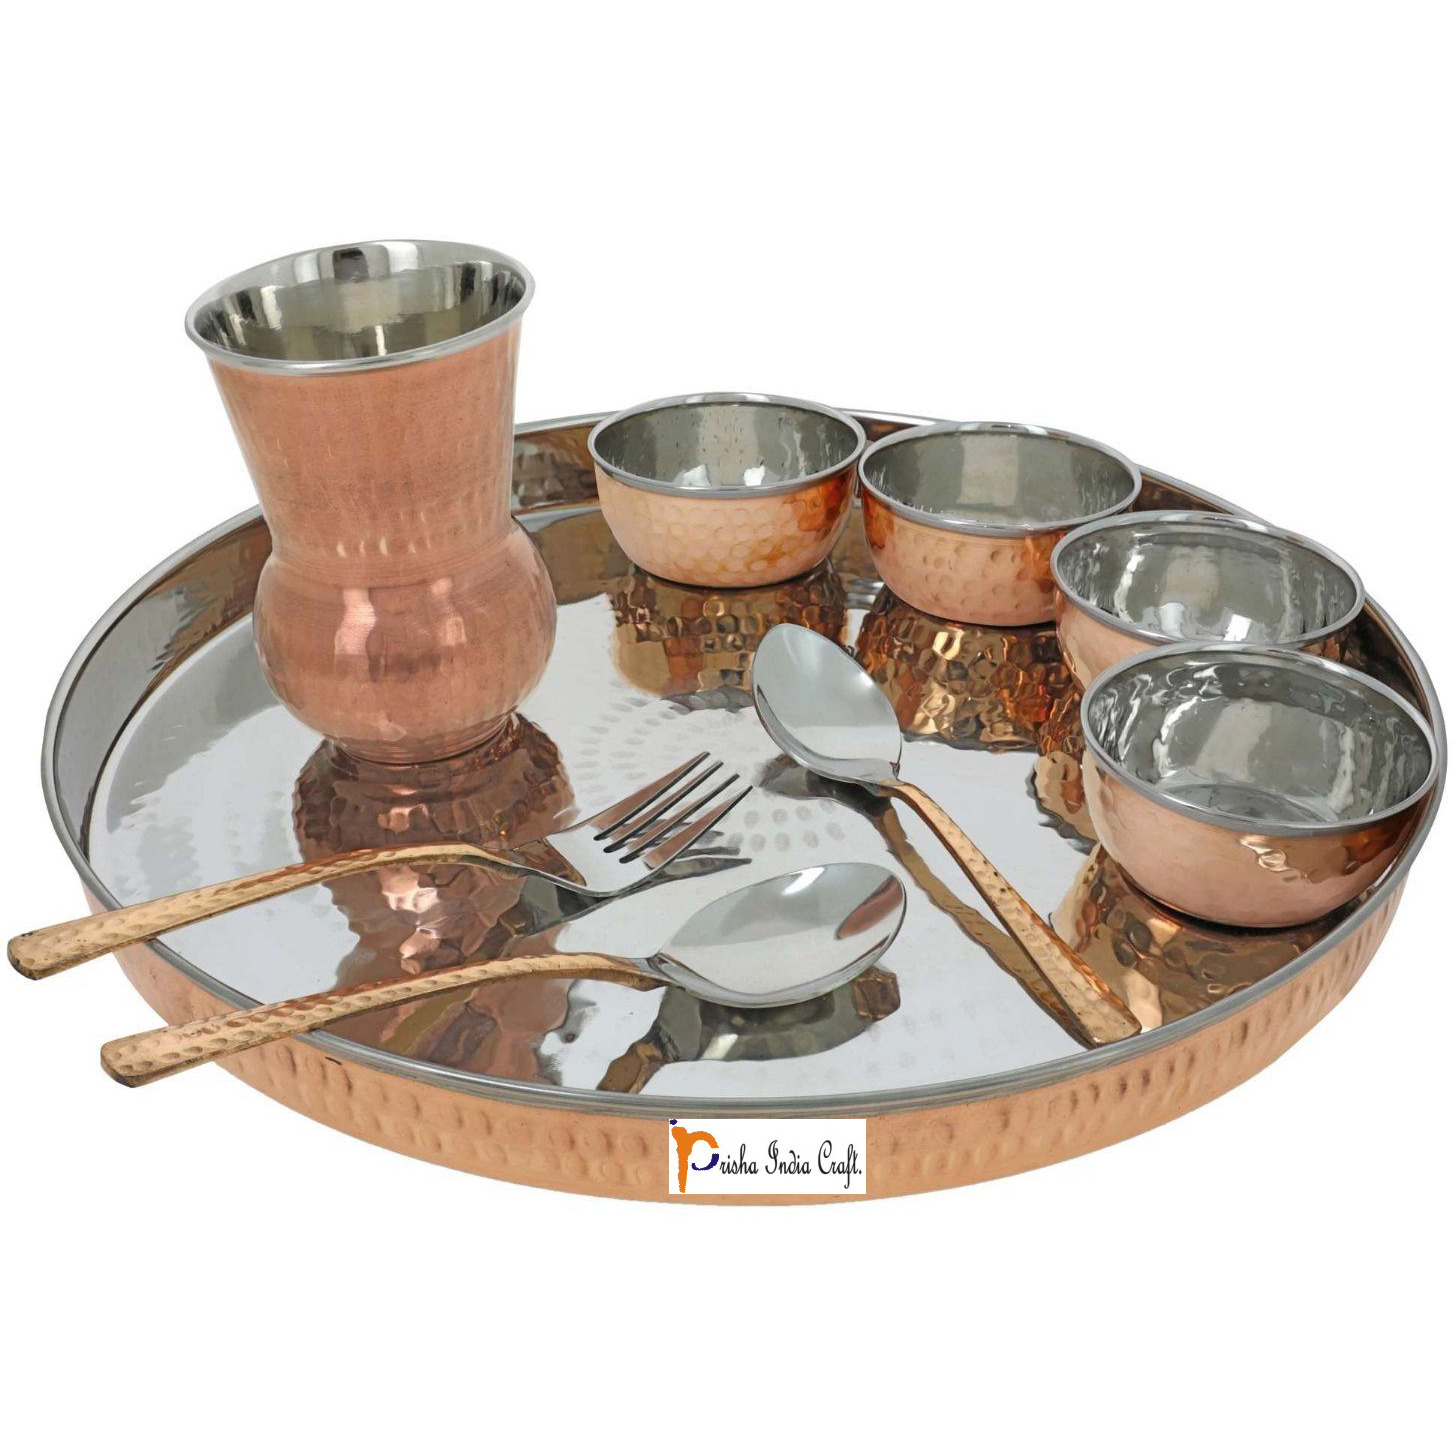 Prisha India Craft B. Set of 5 Dinnerware Traditional Stainless Steel Copper Dinner Set of Thali Plate, Bowls, Glass and Spoons, Dia 13  With 1 Pure Copper Classic Pitcher Jug - Christmas Gift